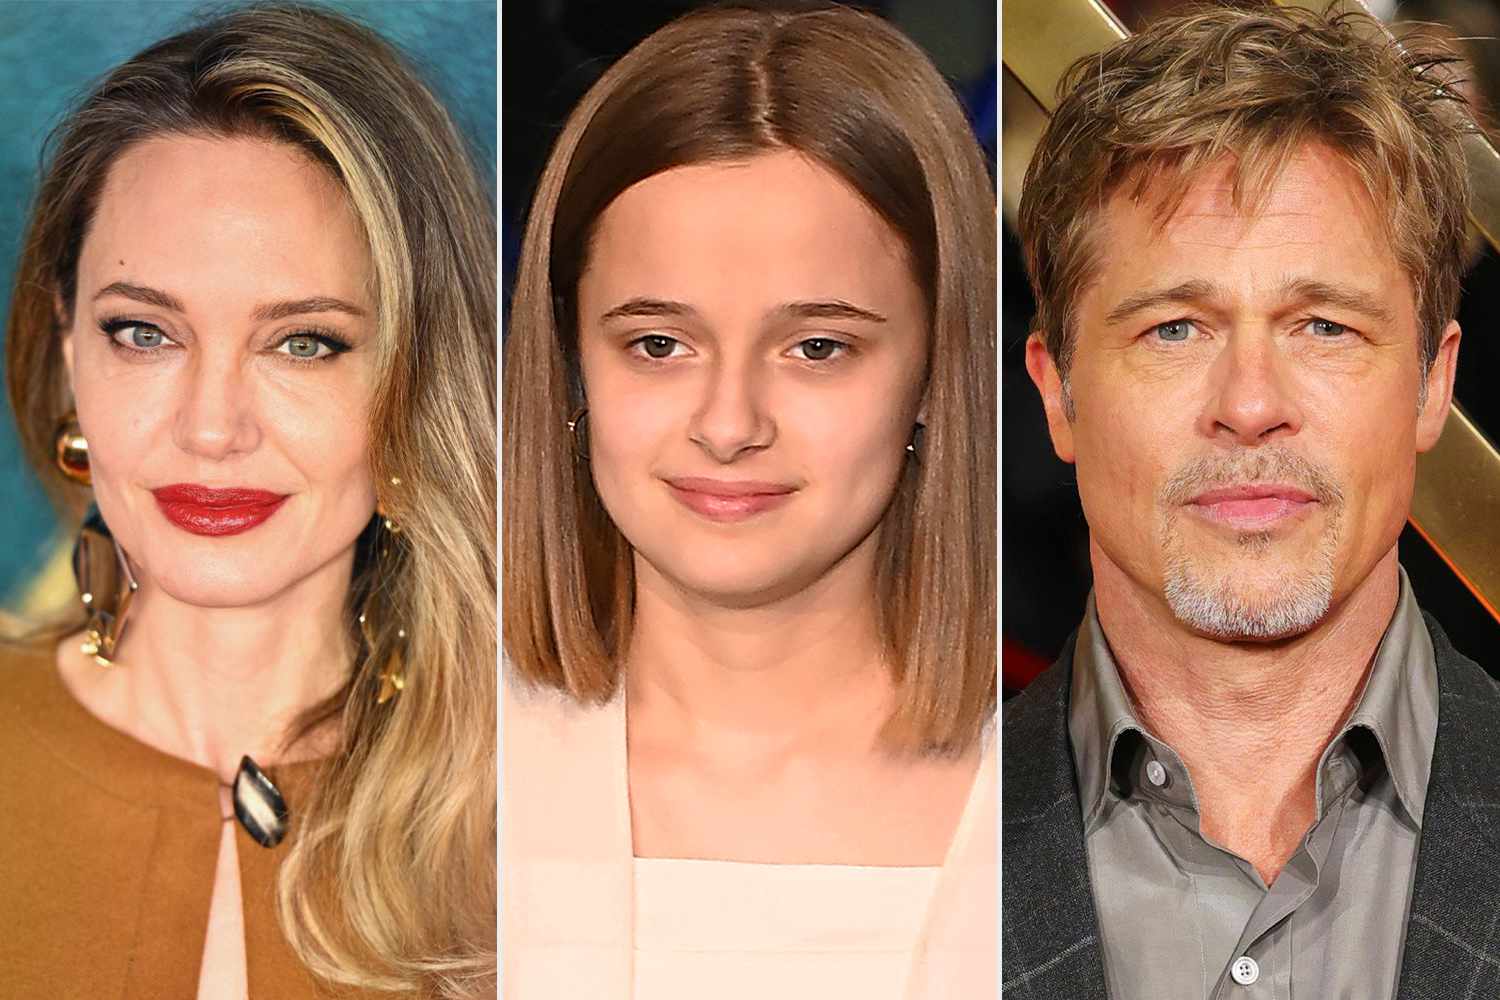 Angelina Jolie and Brad Pitt's Daughter Vivienne, 15, Listed as 'Vivienne Jolie' in “The Outsiders ”Playbill